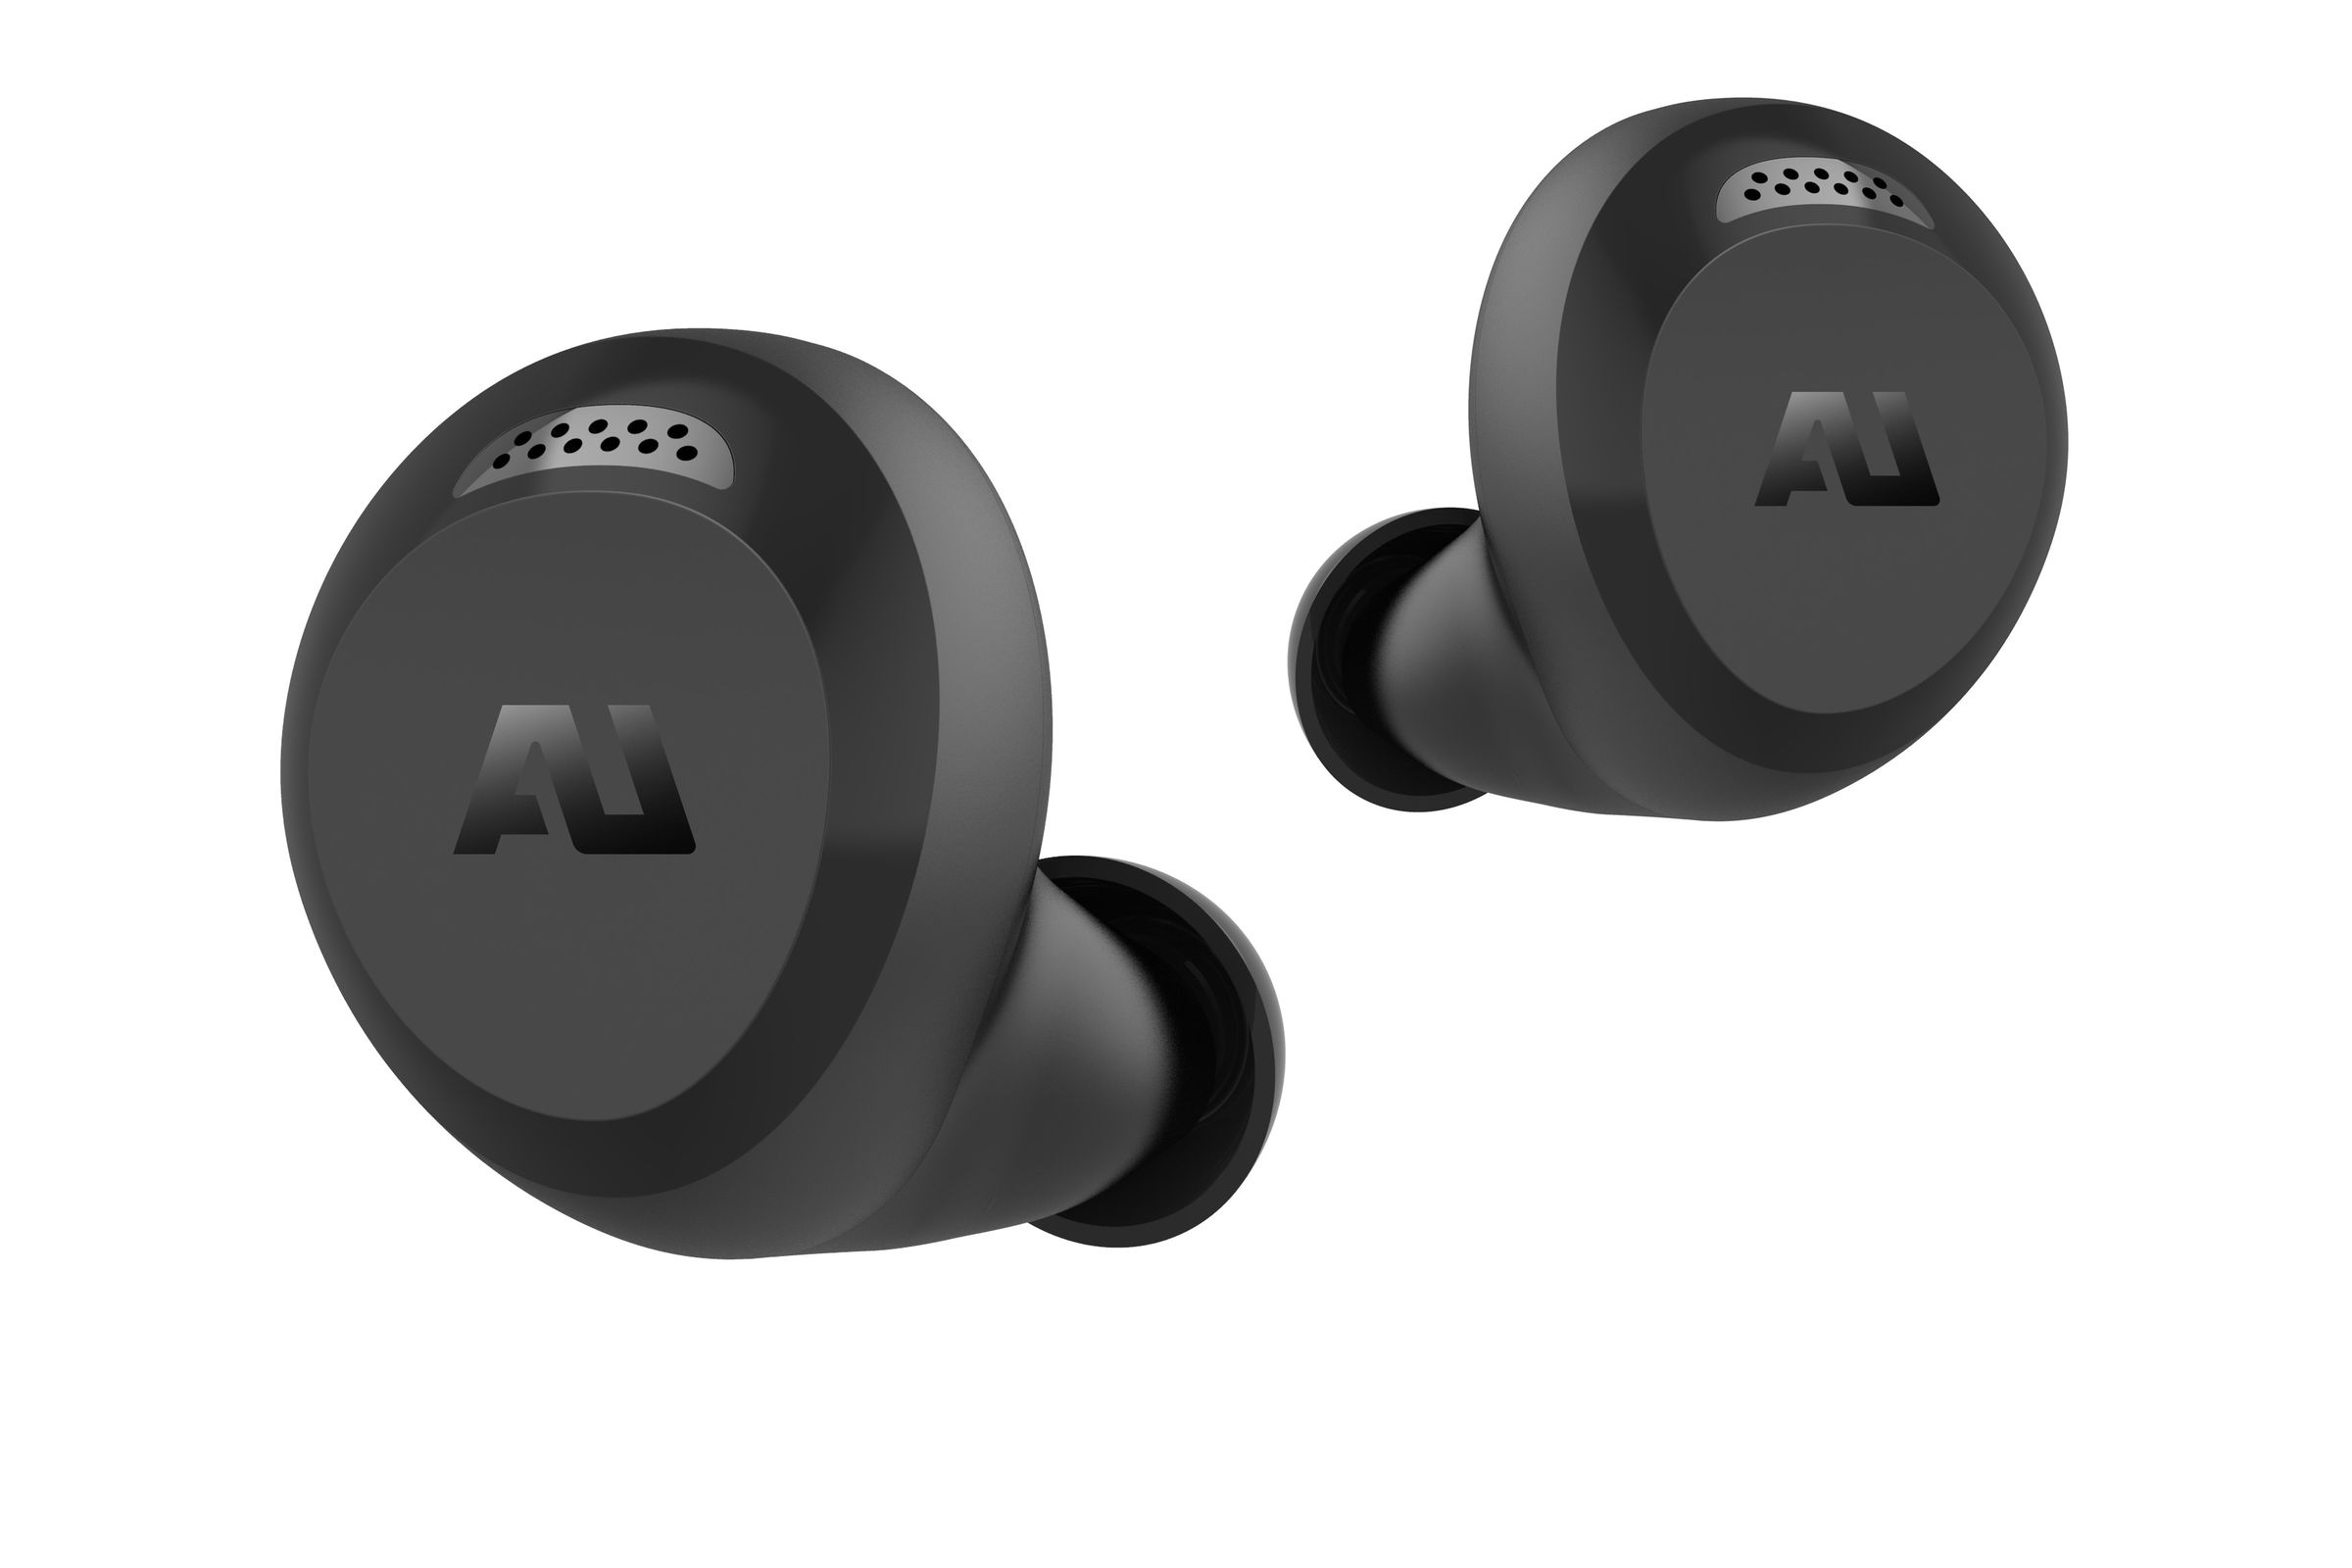 Ausounds’ true wireless ANC earbuds will be available next month.